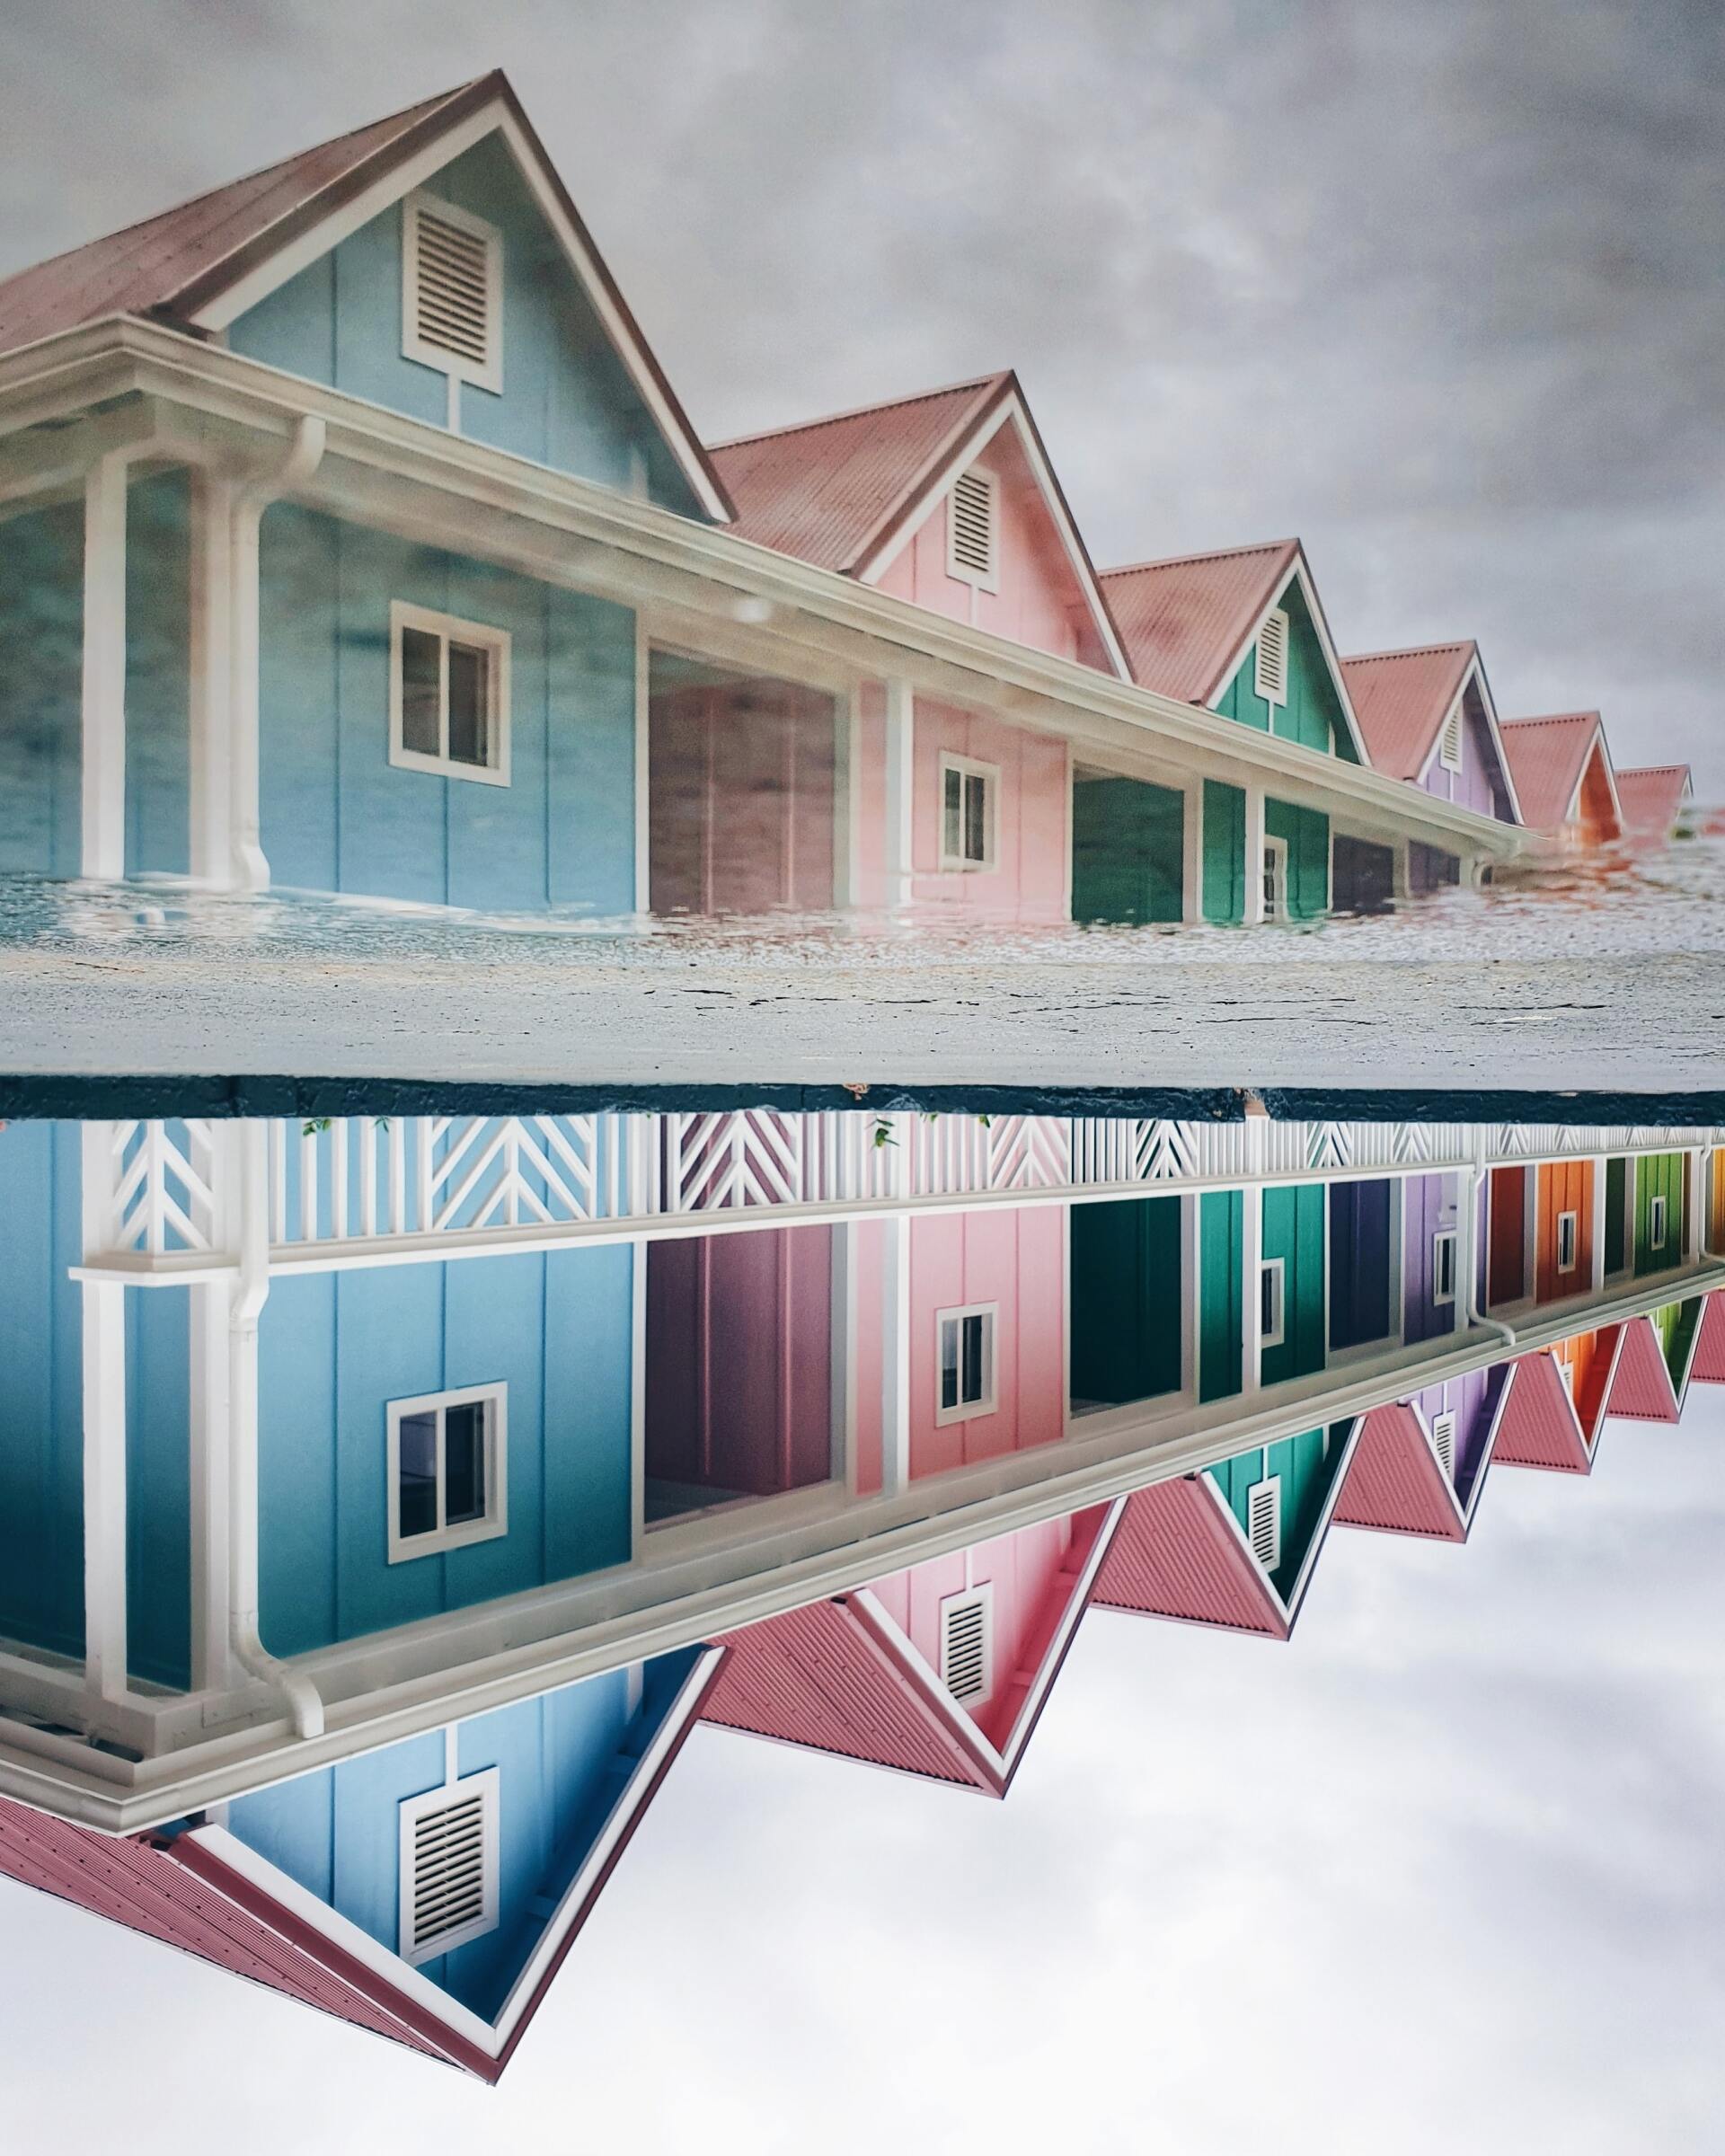 Row of houses in pastel colors with mirror image reflection